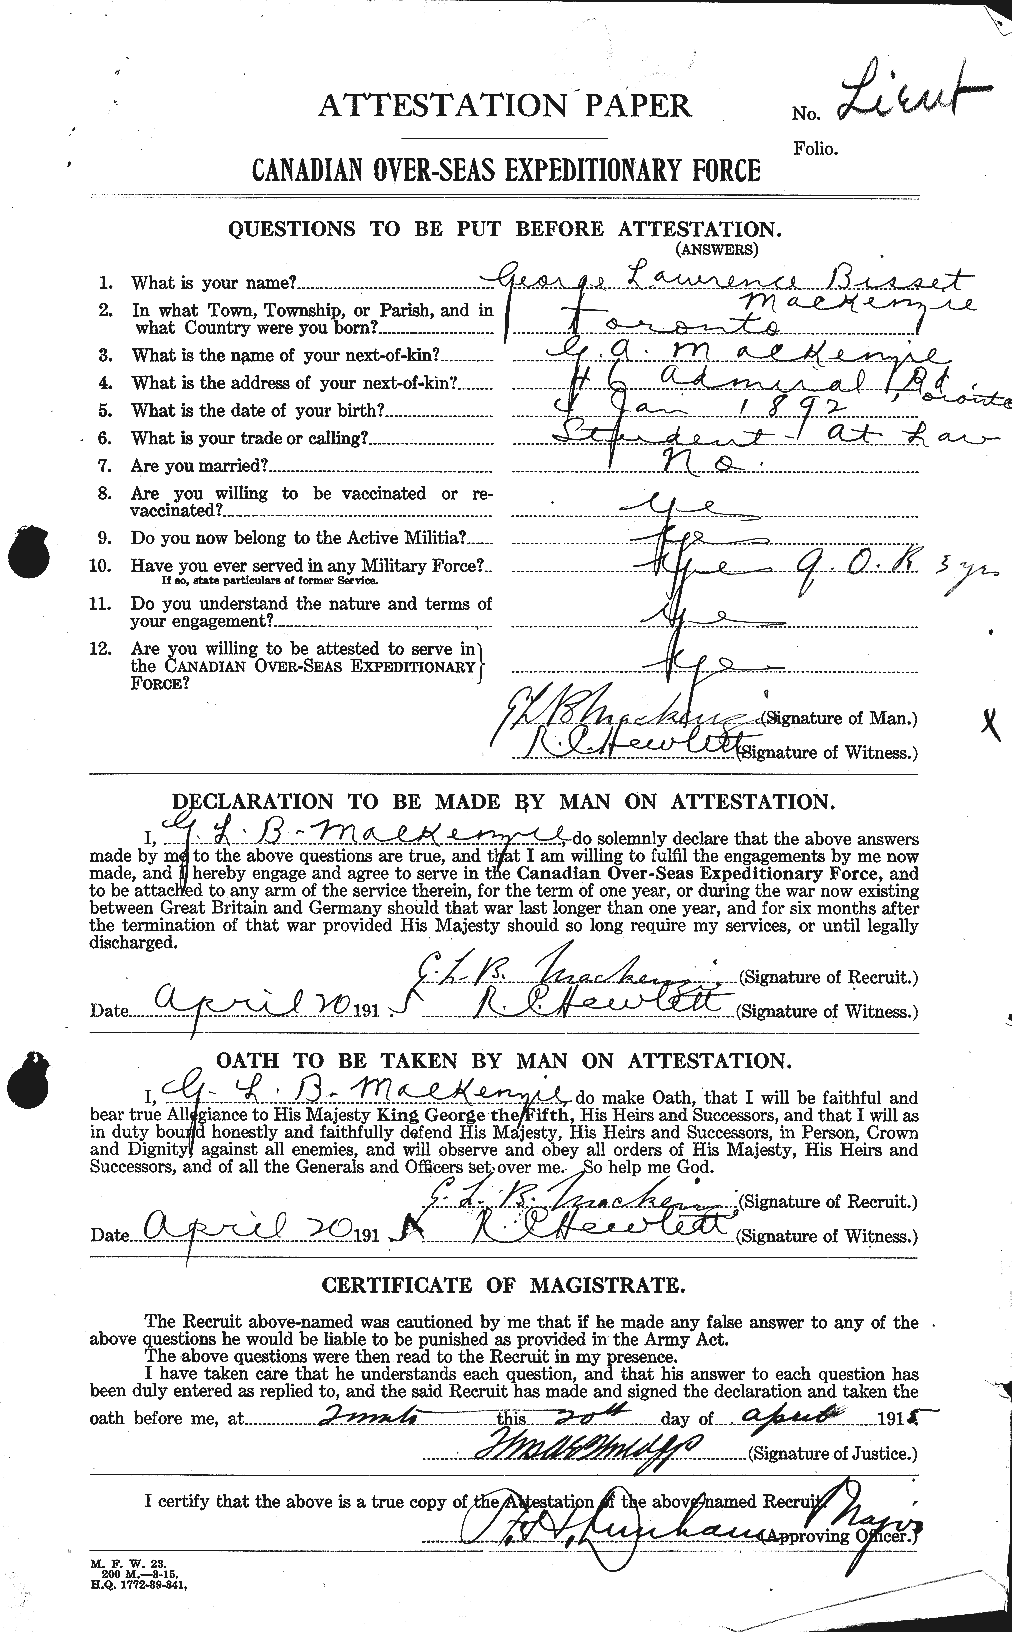 Personnel Records of the First World War - CEF 531561a